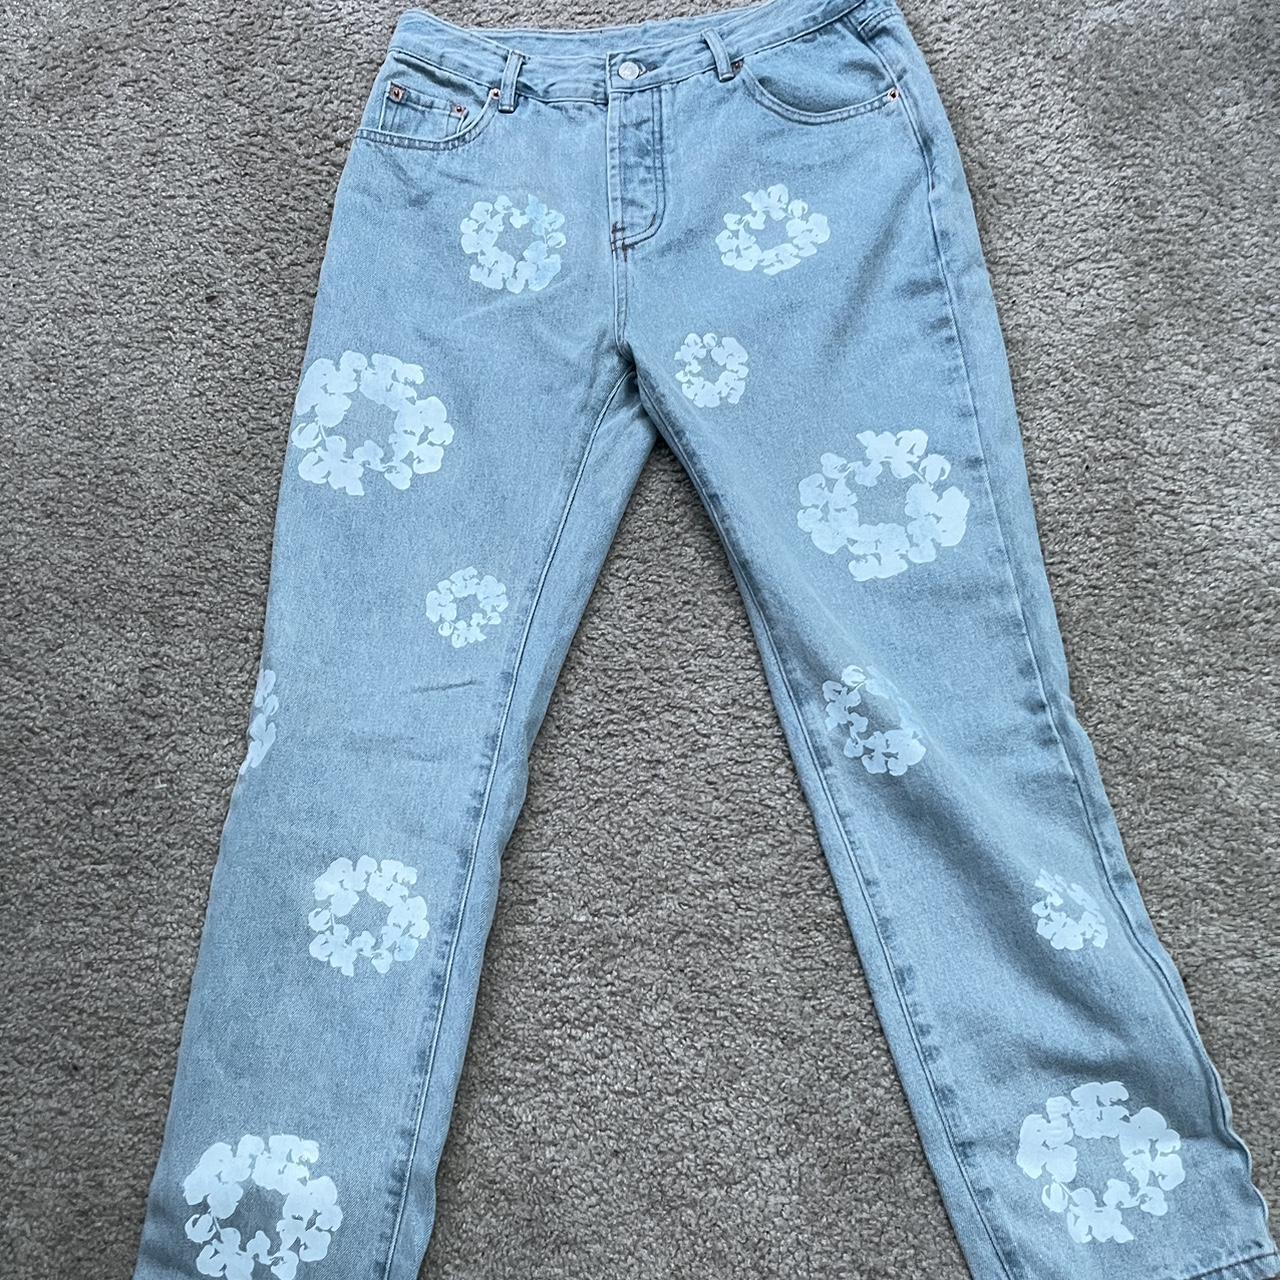 Denim Tears Jeans worn once, washed them and... - Depop